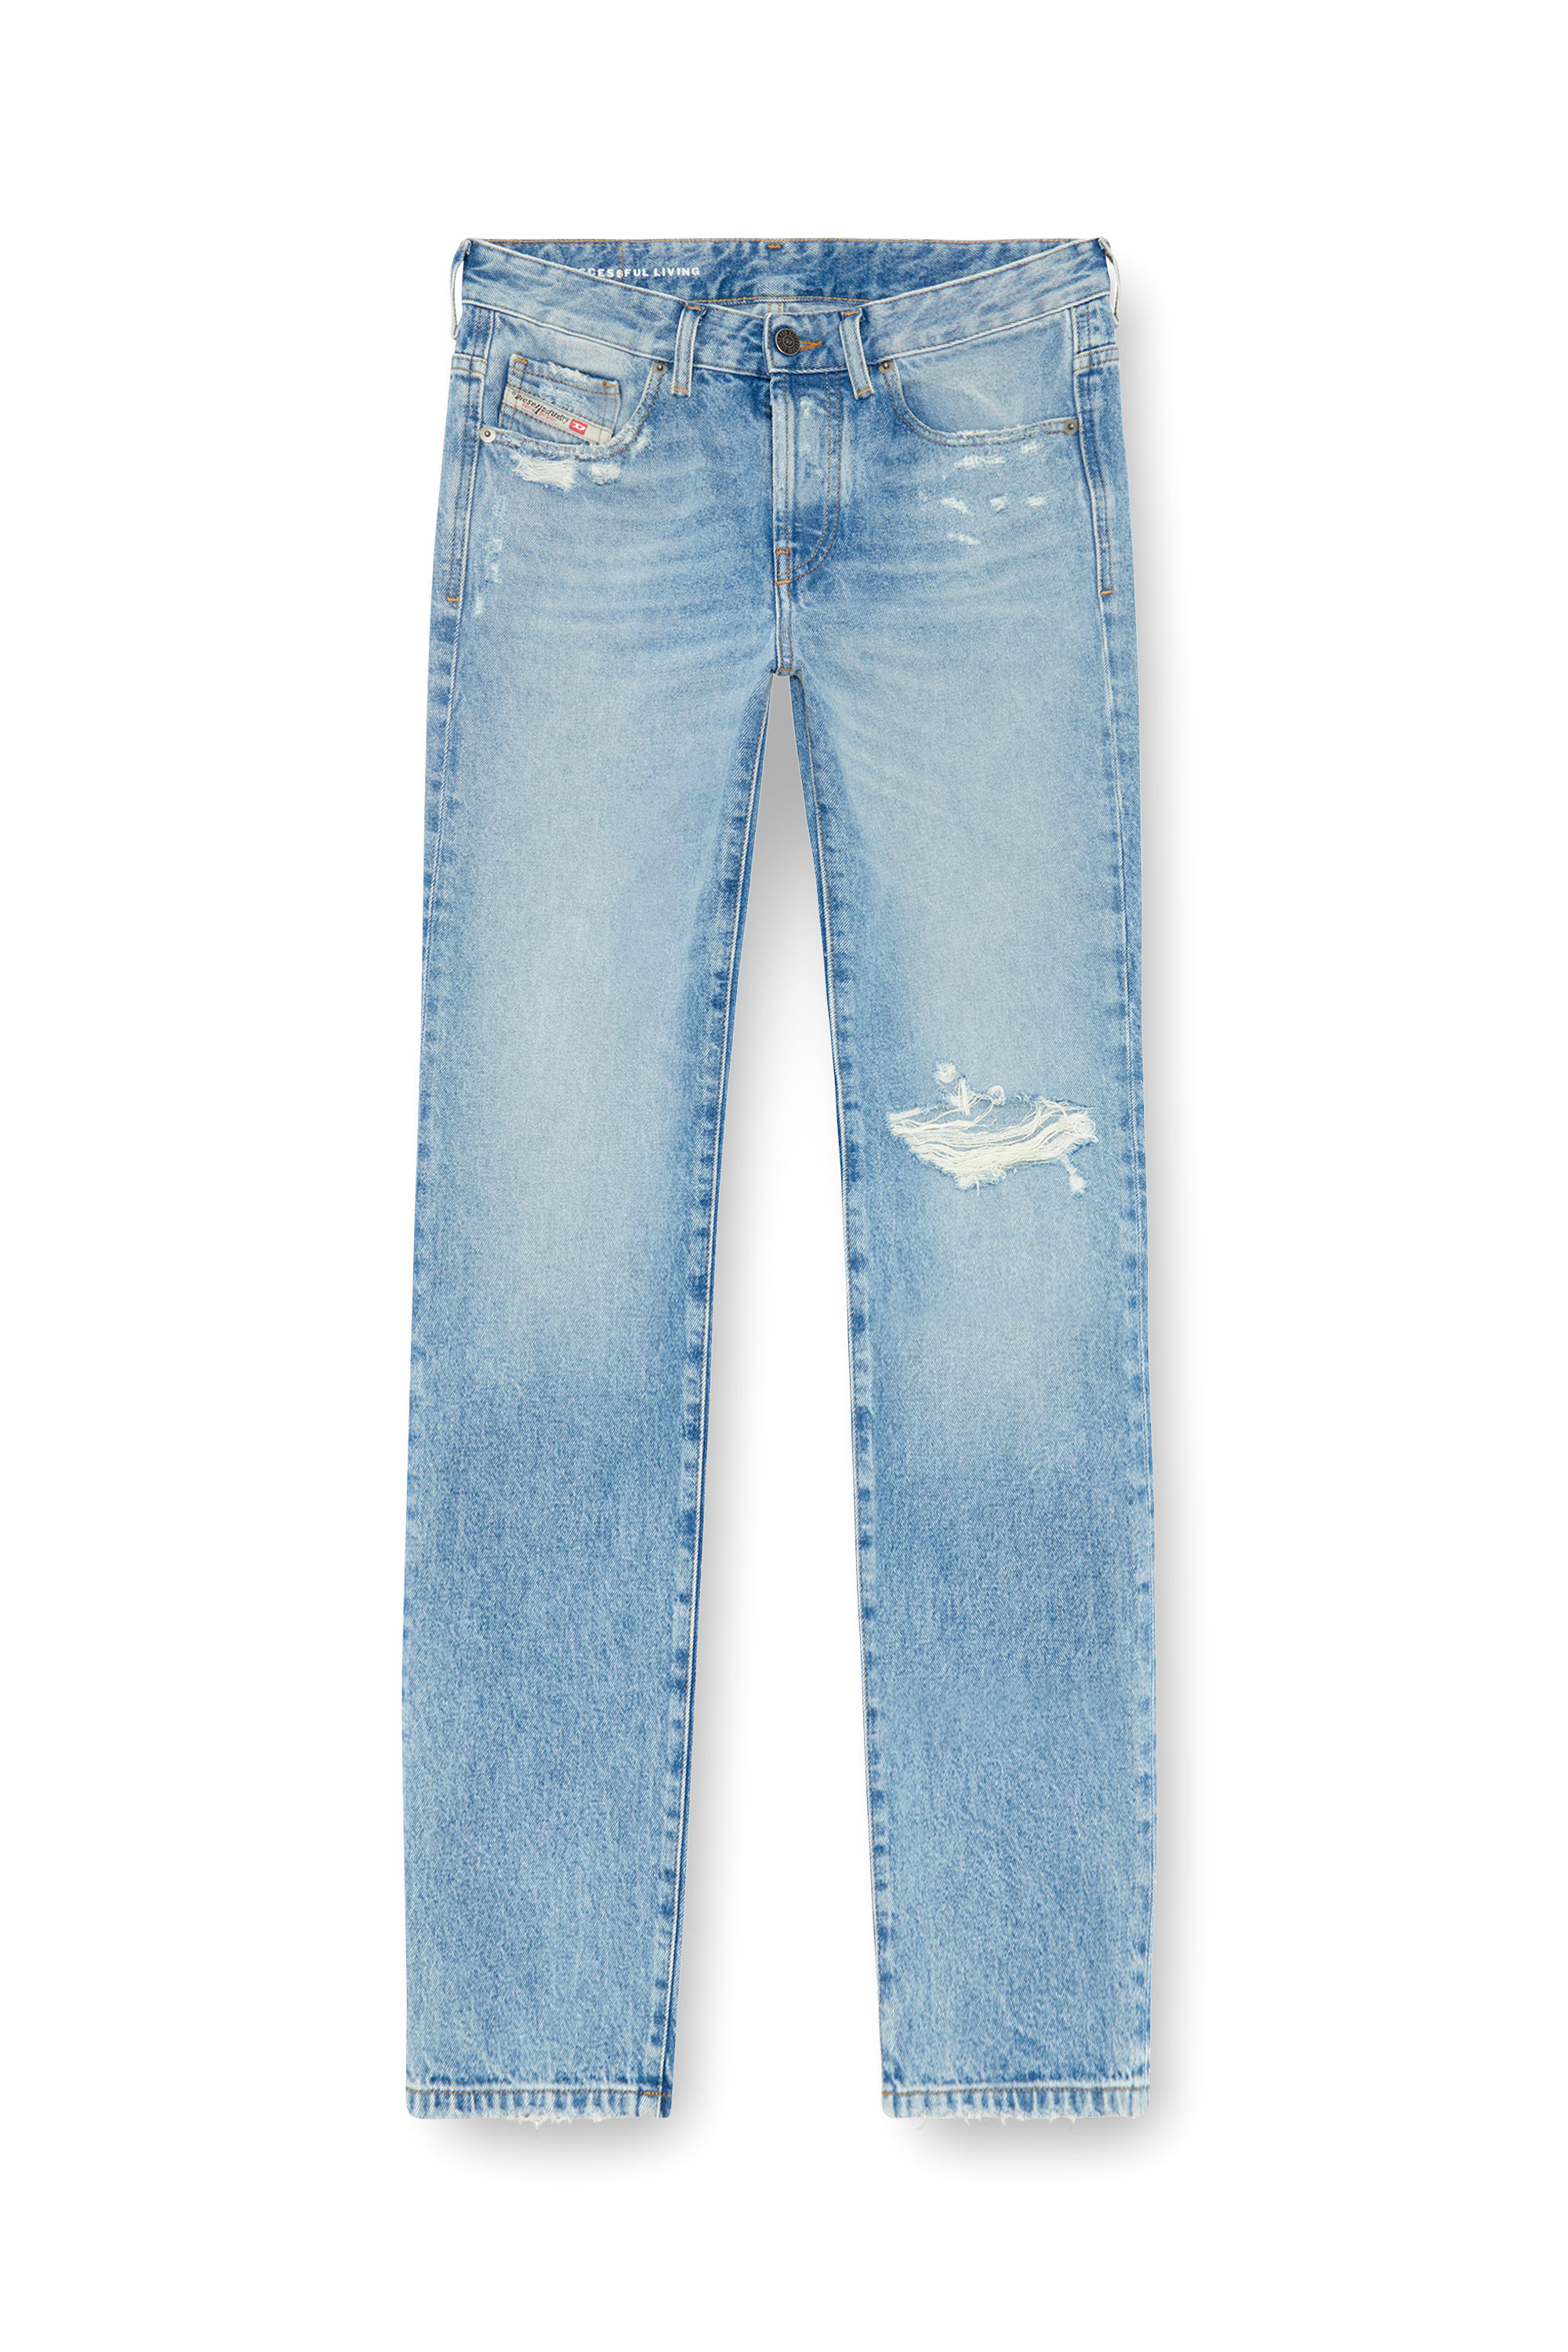 Diesel - Straight Jeans 1989 D-Mine 09J80, Mujer Straight Jeans - 1989 D-Mine in Azul marino - Image 6